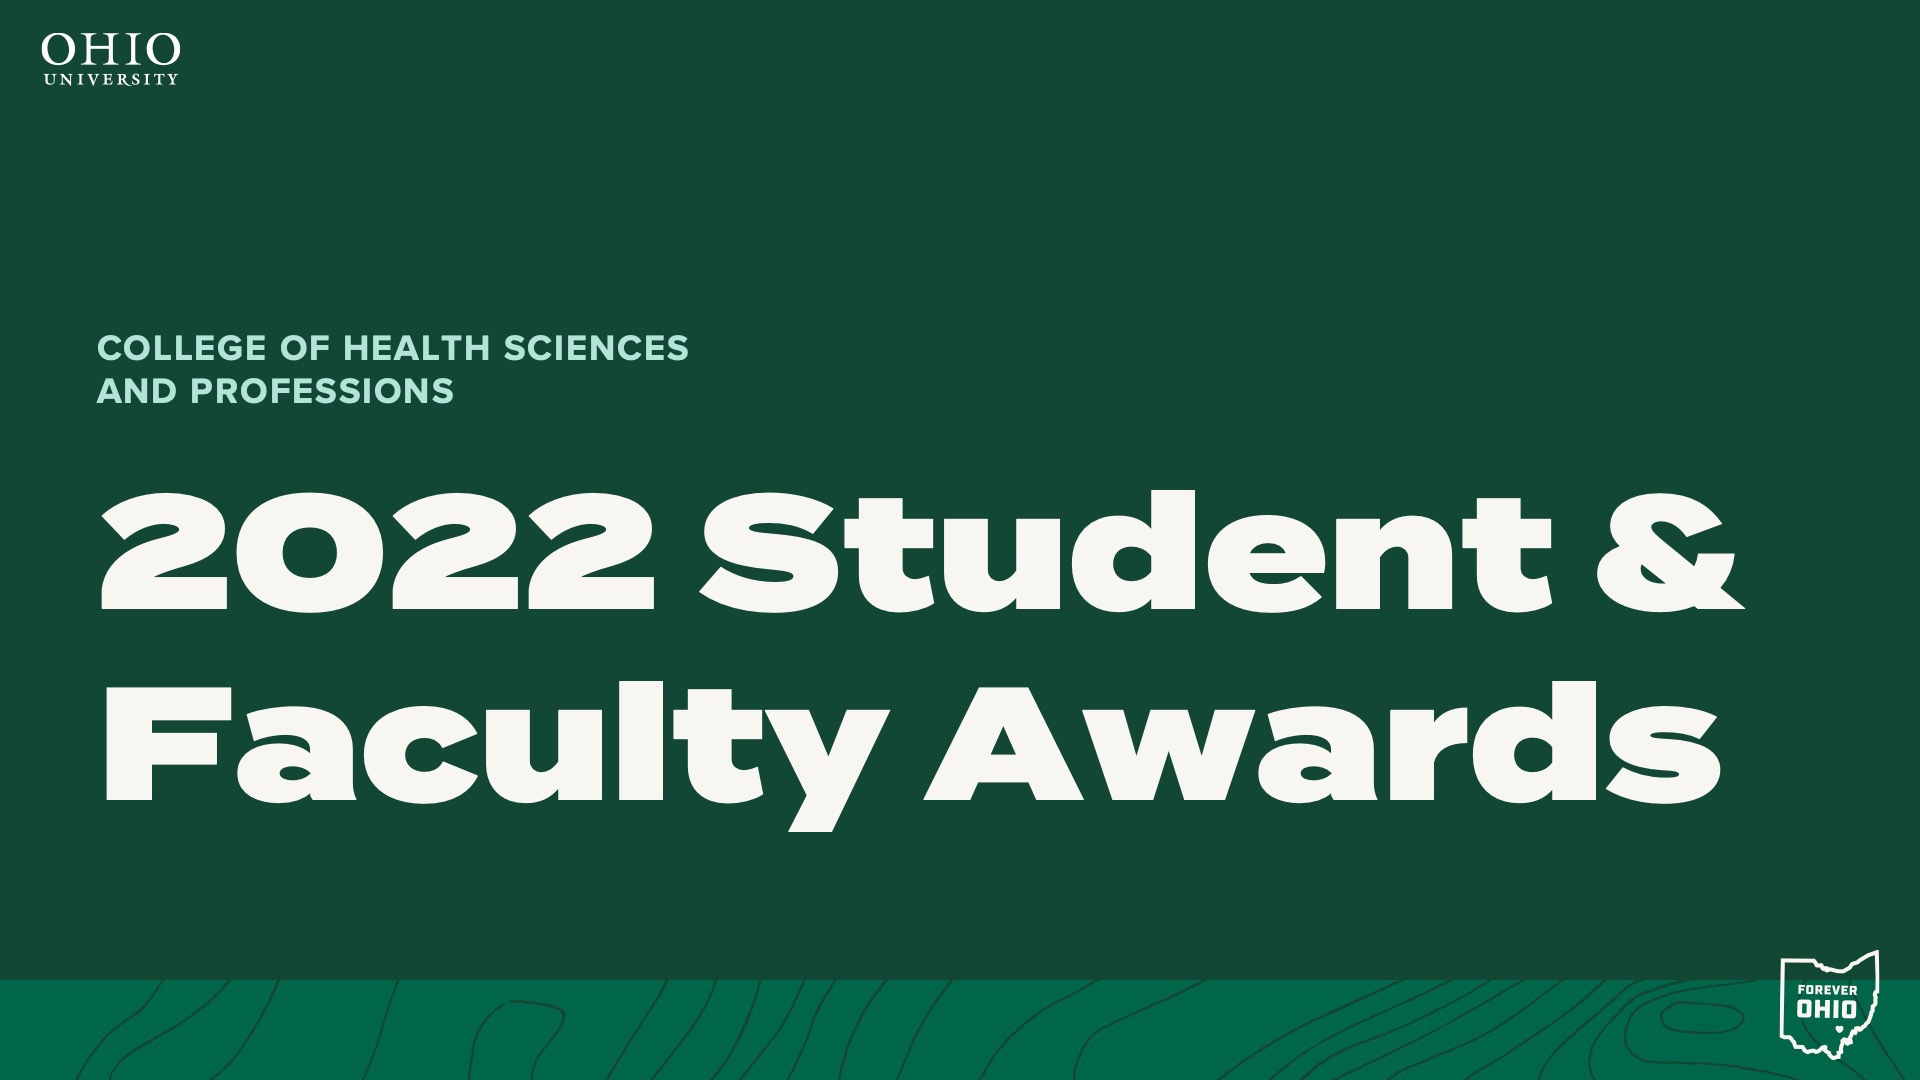 2022 Student and Faculty Awards